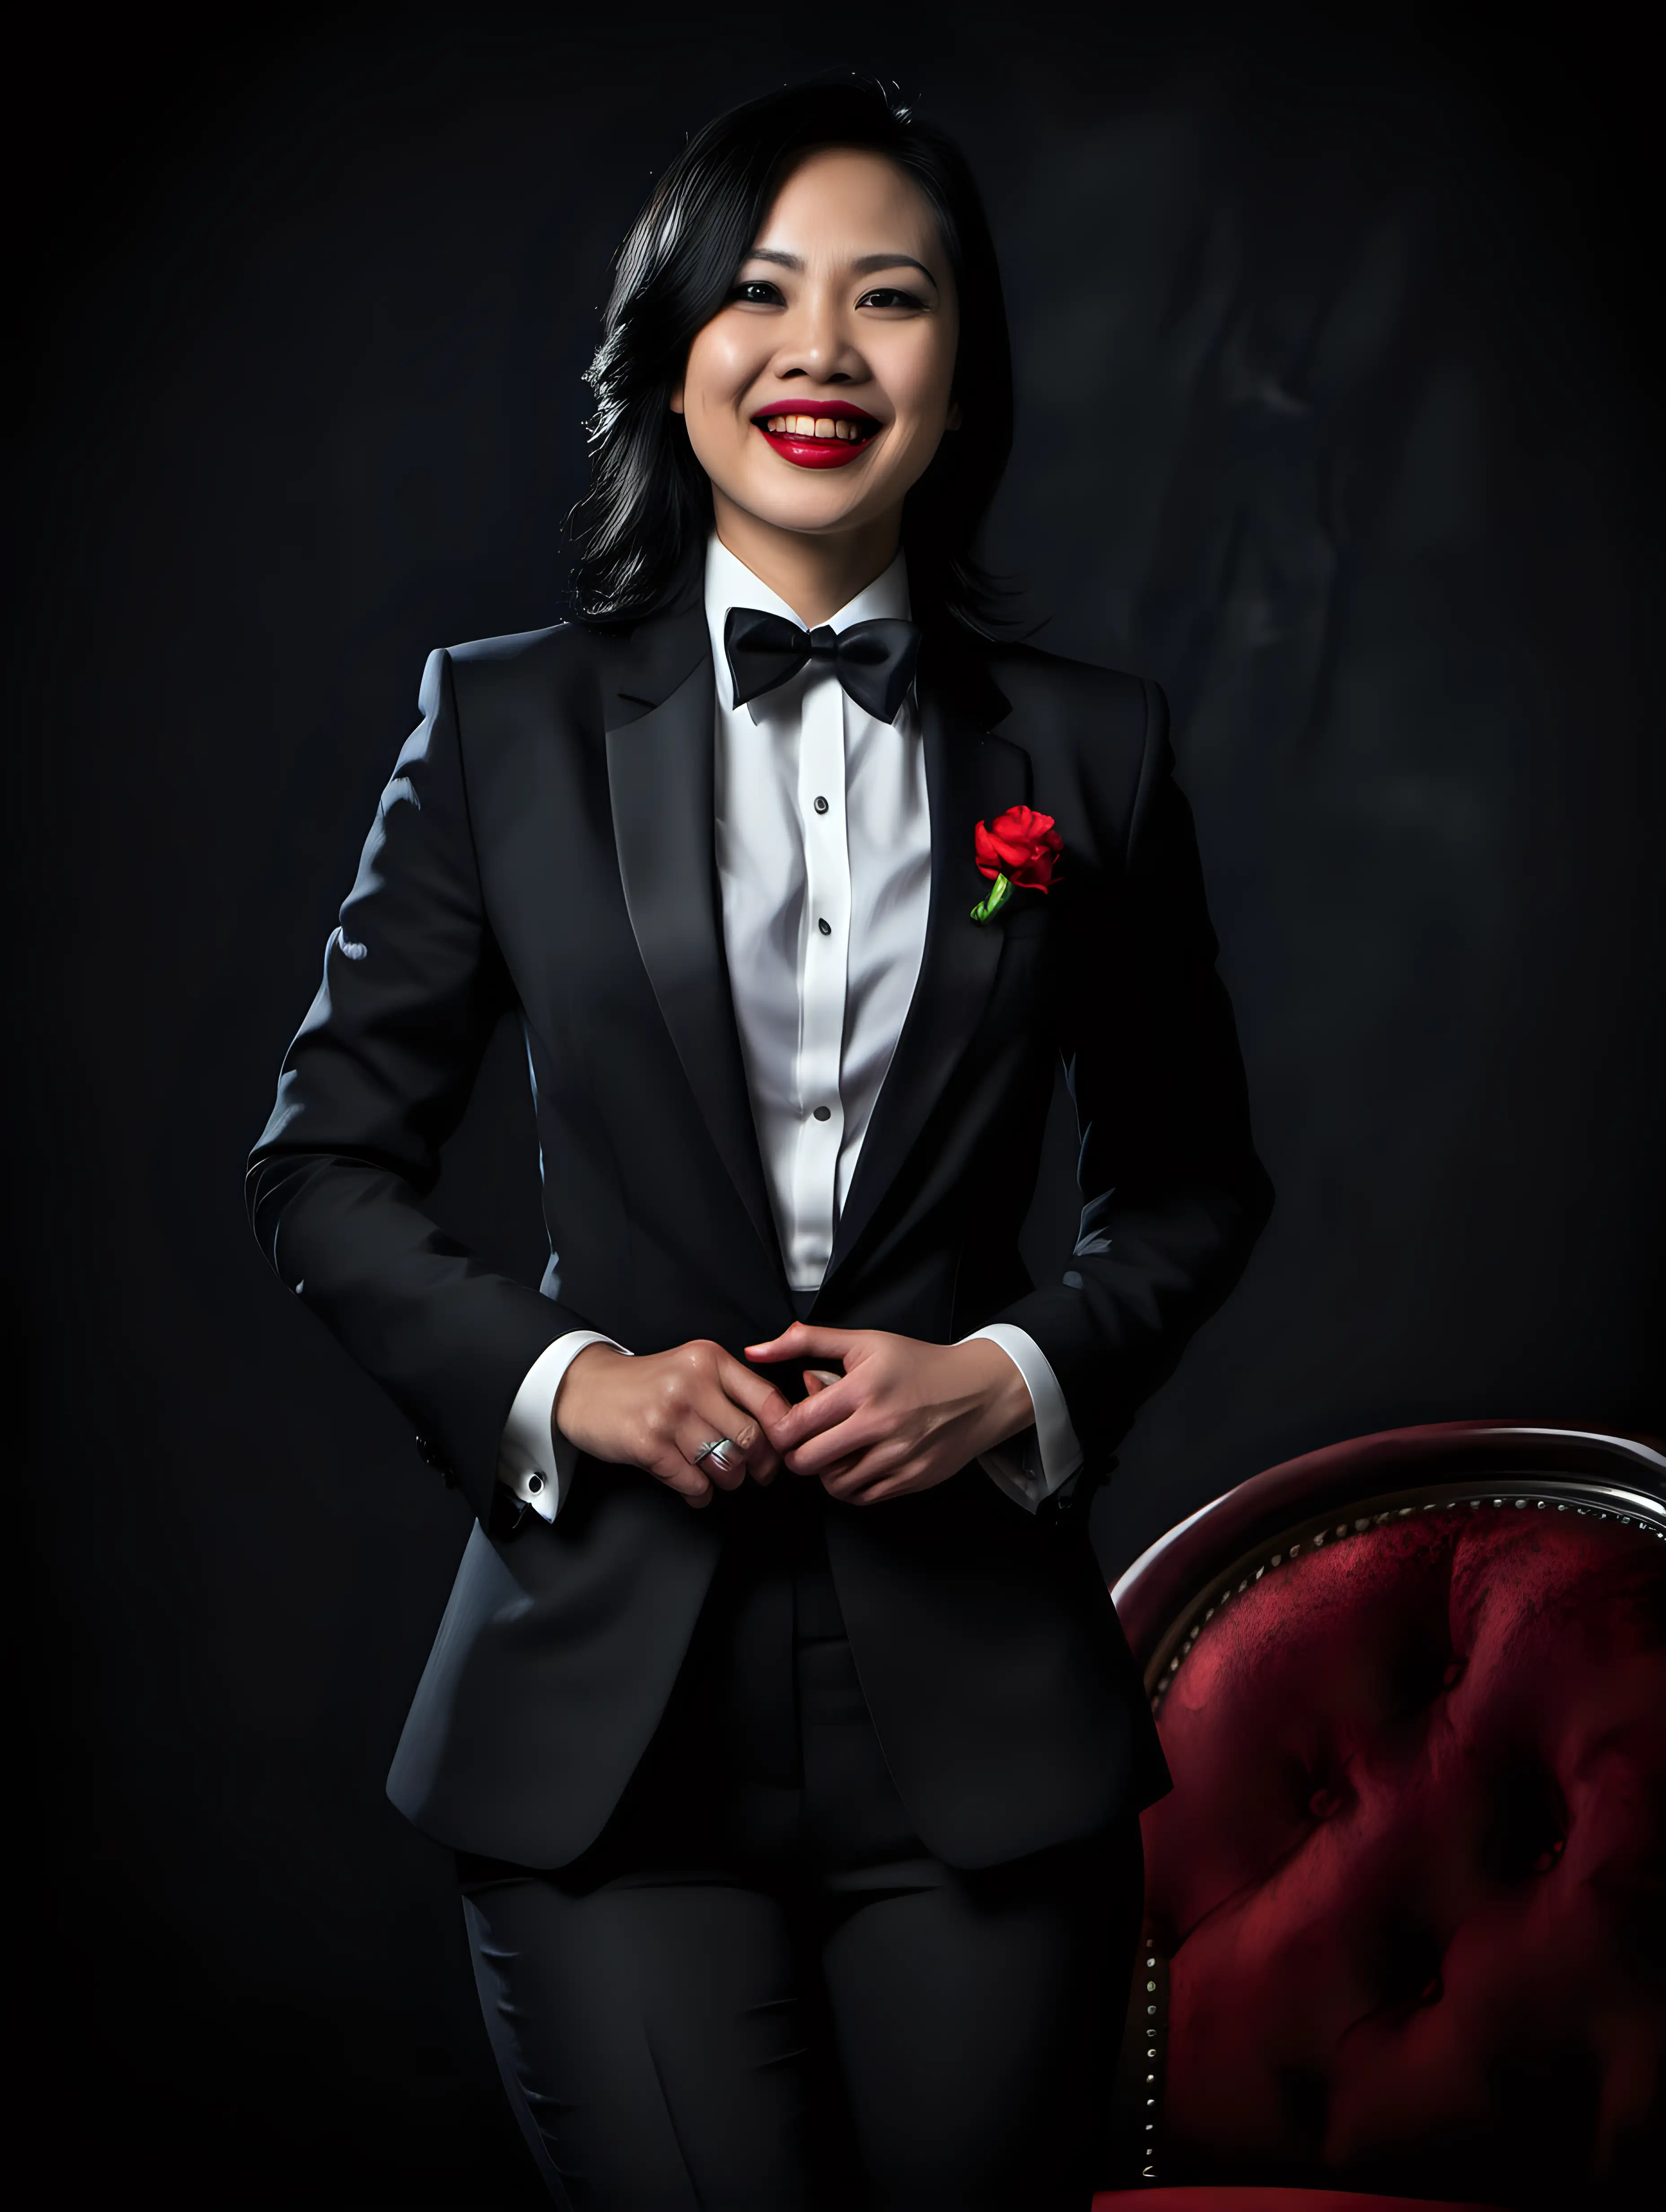 A portrait of a pretty 35 year old Vietnamese woman with shoulder length black hair and red lipstick is sitting in a chair in a dark room. She is facing forward. She is smiling and joyful and ecstatic. She is wearing a tuxedo. (Her jacket is open and not buttoned.) (Her pants are black.) Her shirt is white with a black bow tie. Her cufflinks are large and black. Her jacket is unbuttoned and has a corsage.